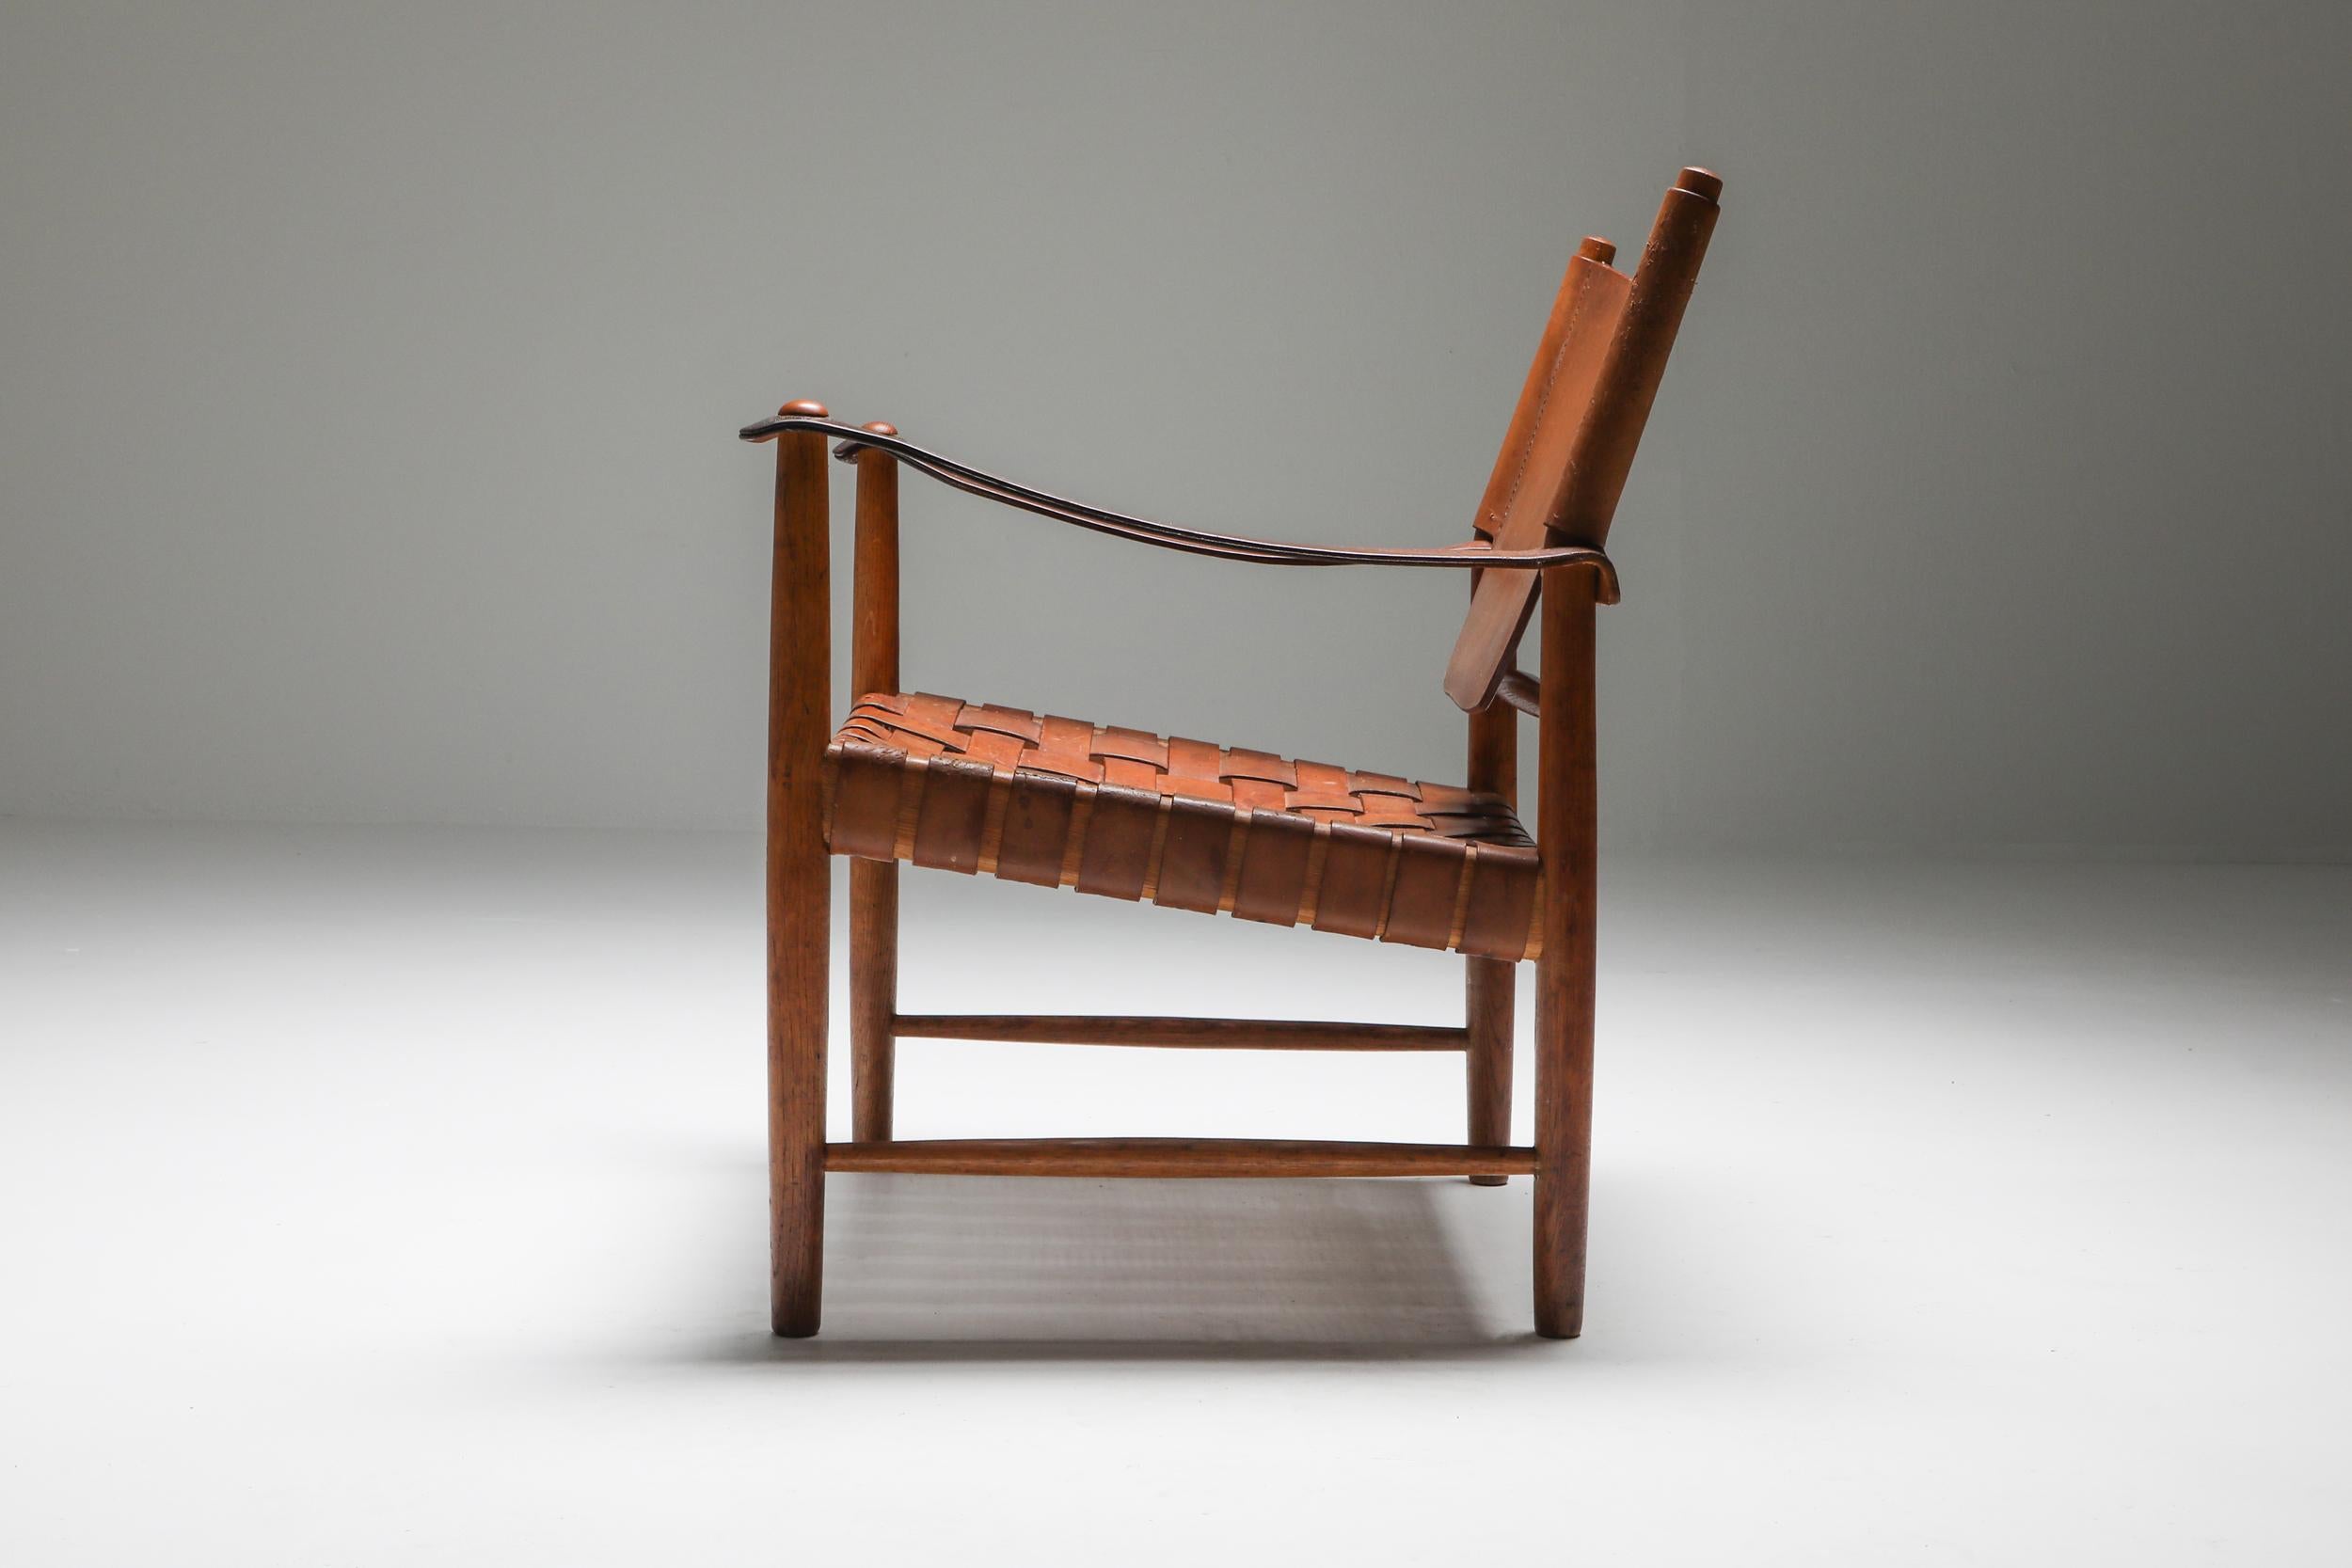 Sirocco Safari chair by Arne Norrél, Sweden, 1960s.

Designed by Swedish architect Arne Norell in circa 1962 and made by his own company 'Norell Möbel AB' in Sweden. Frame in solid wood, armrests and backrest in thick brown leather and seating in